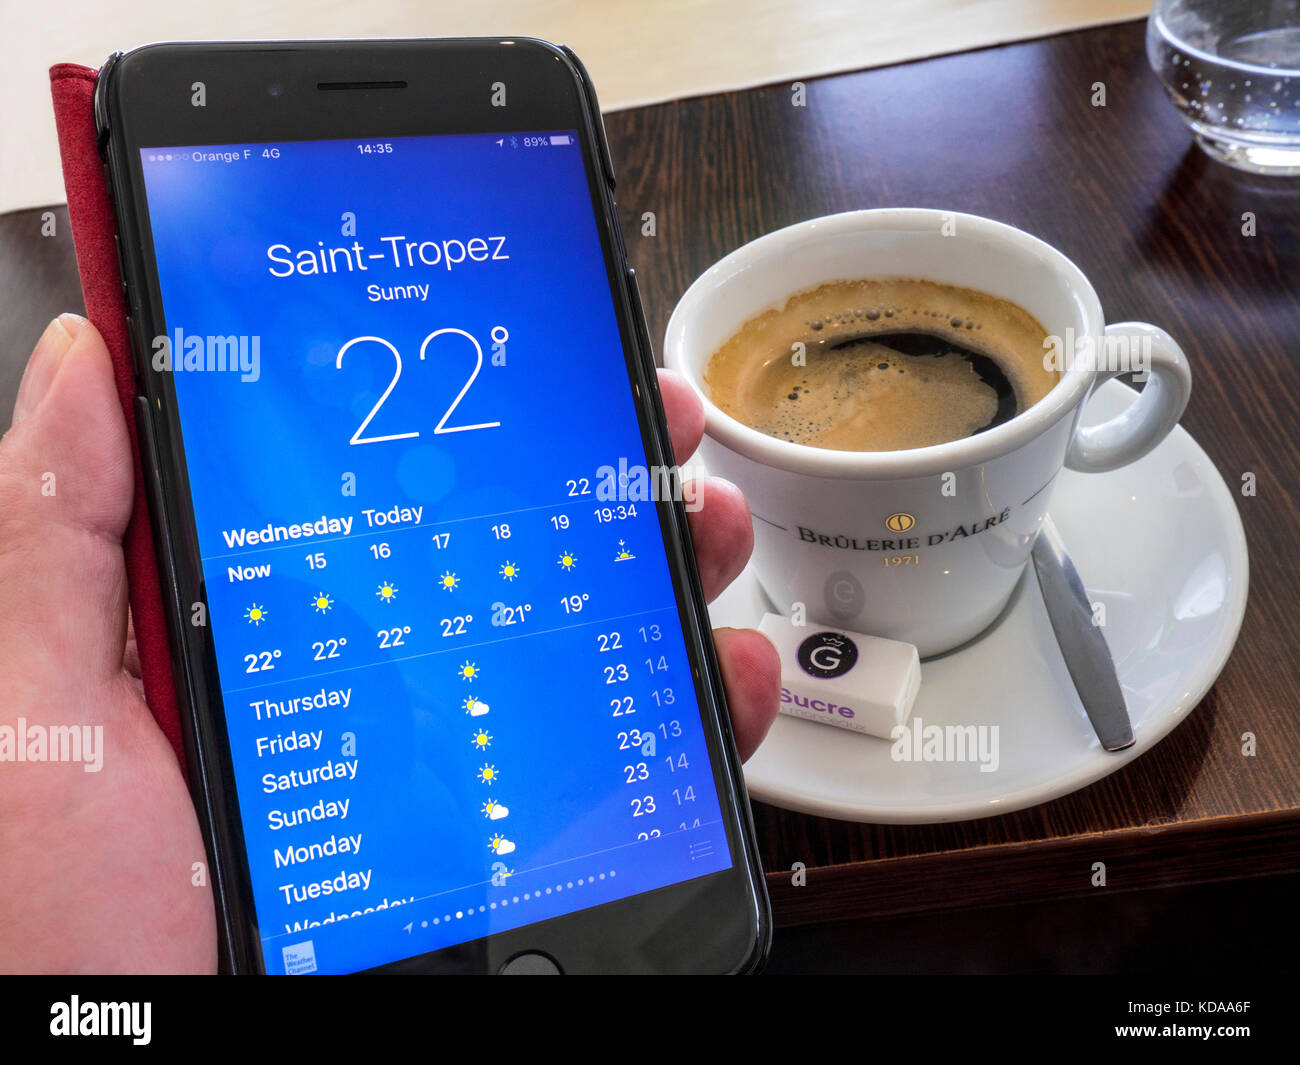 WEATHER APP SAINT TROPEZ  in restaurant table situation expresso coffee cup behind, screen displaying a typically sunny warm 22C weather forecast for Saint-Tropez Cote d’Azur France Stock Photo